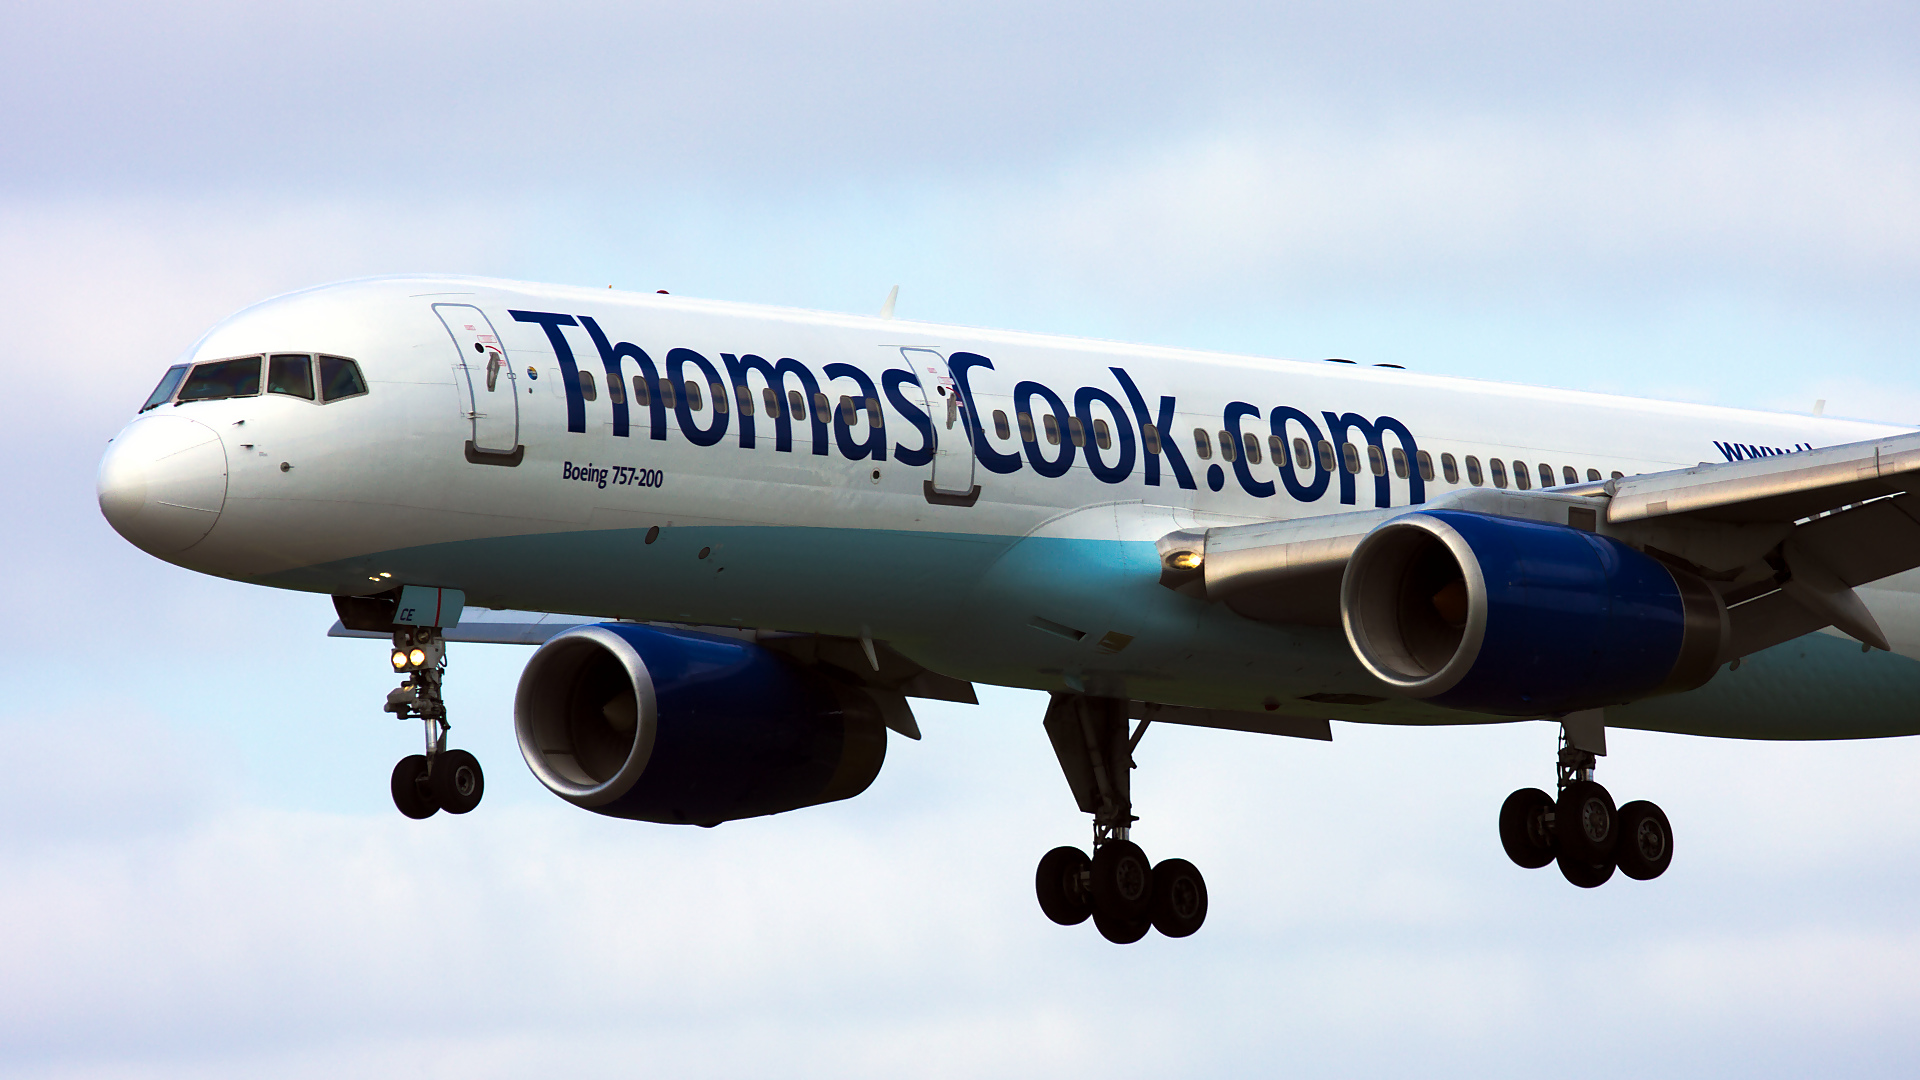 G-JMCE ✈ Thomas Cook Airlines Boeing 757-25F @ Manchester